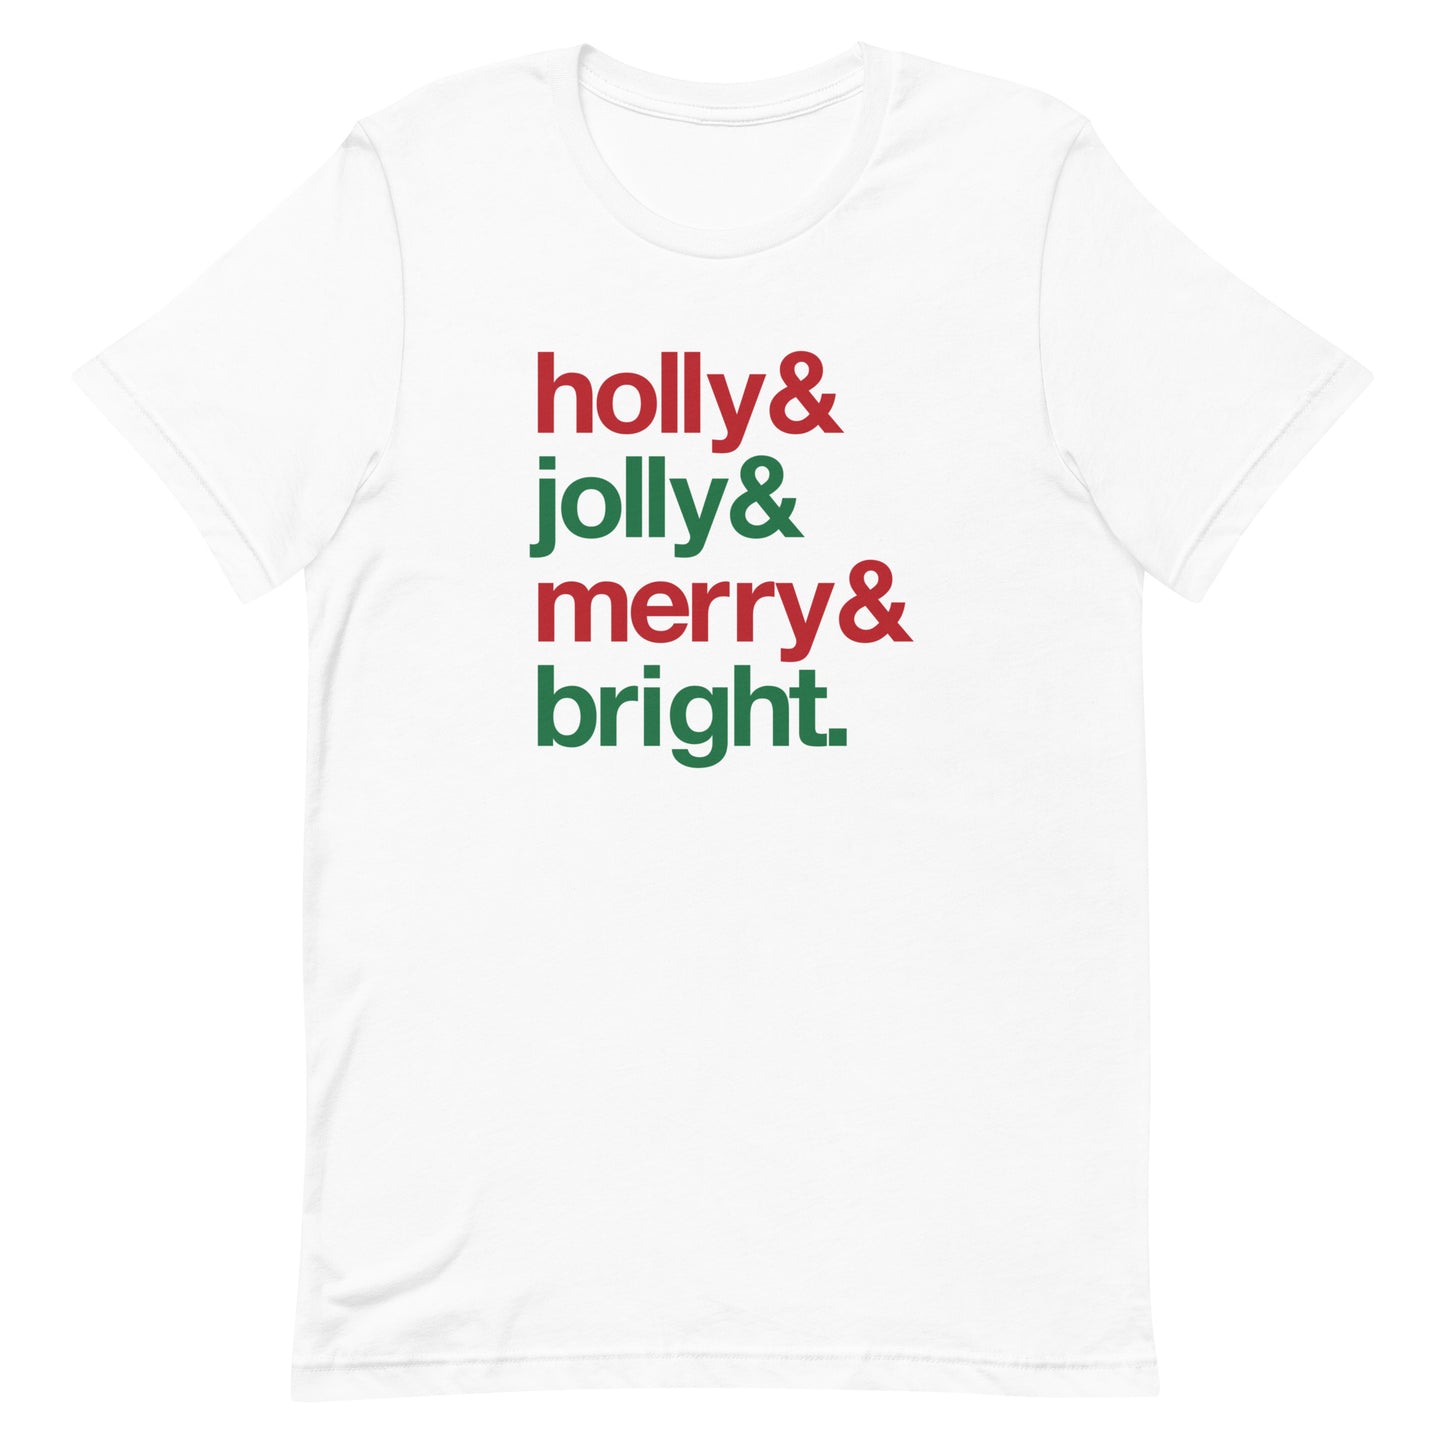 A white crewneck t-shirt with four lines of red and green text that read "Holly & Jolly & Merry & Bright."